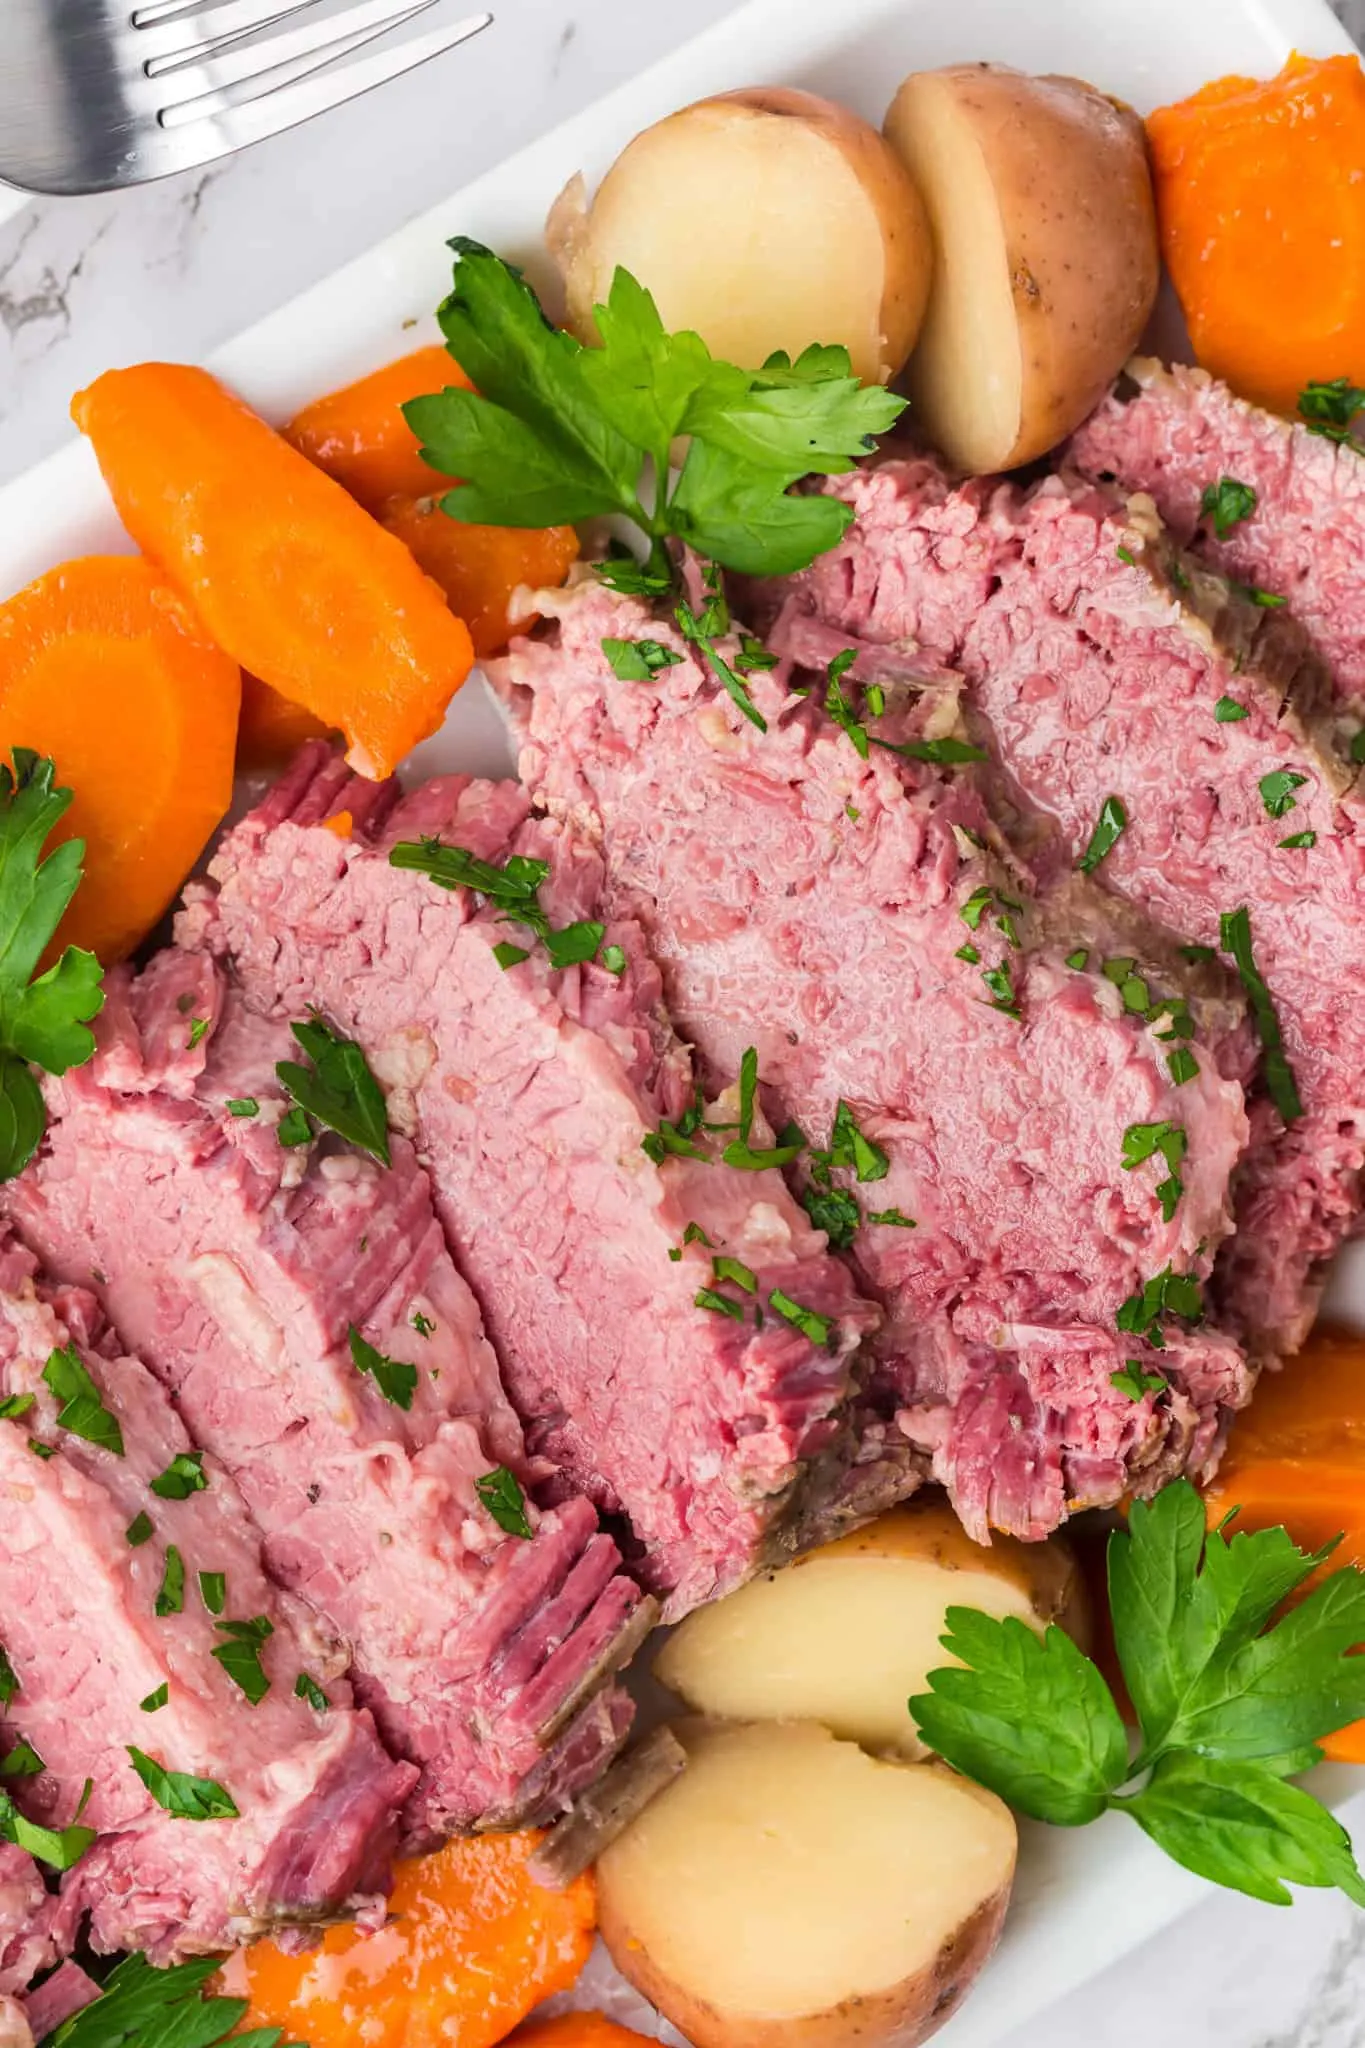 Crock Pot Corned Beef is a hearty slow cooker meal with the beef brisket, carrots and potatoes all cooked together.